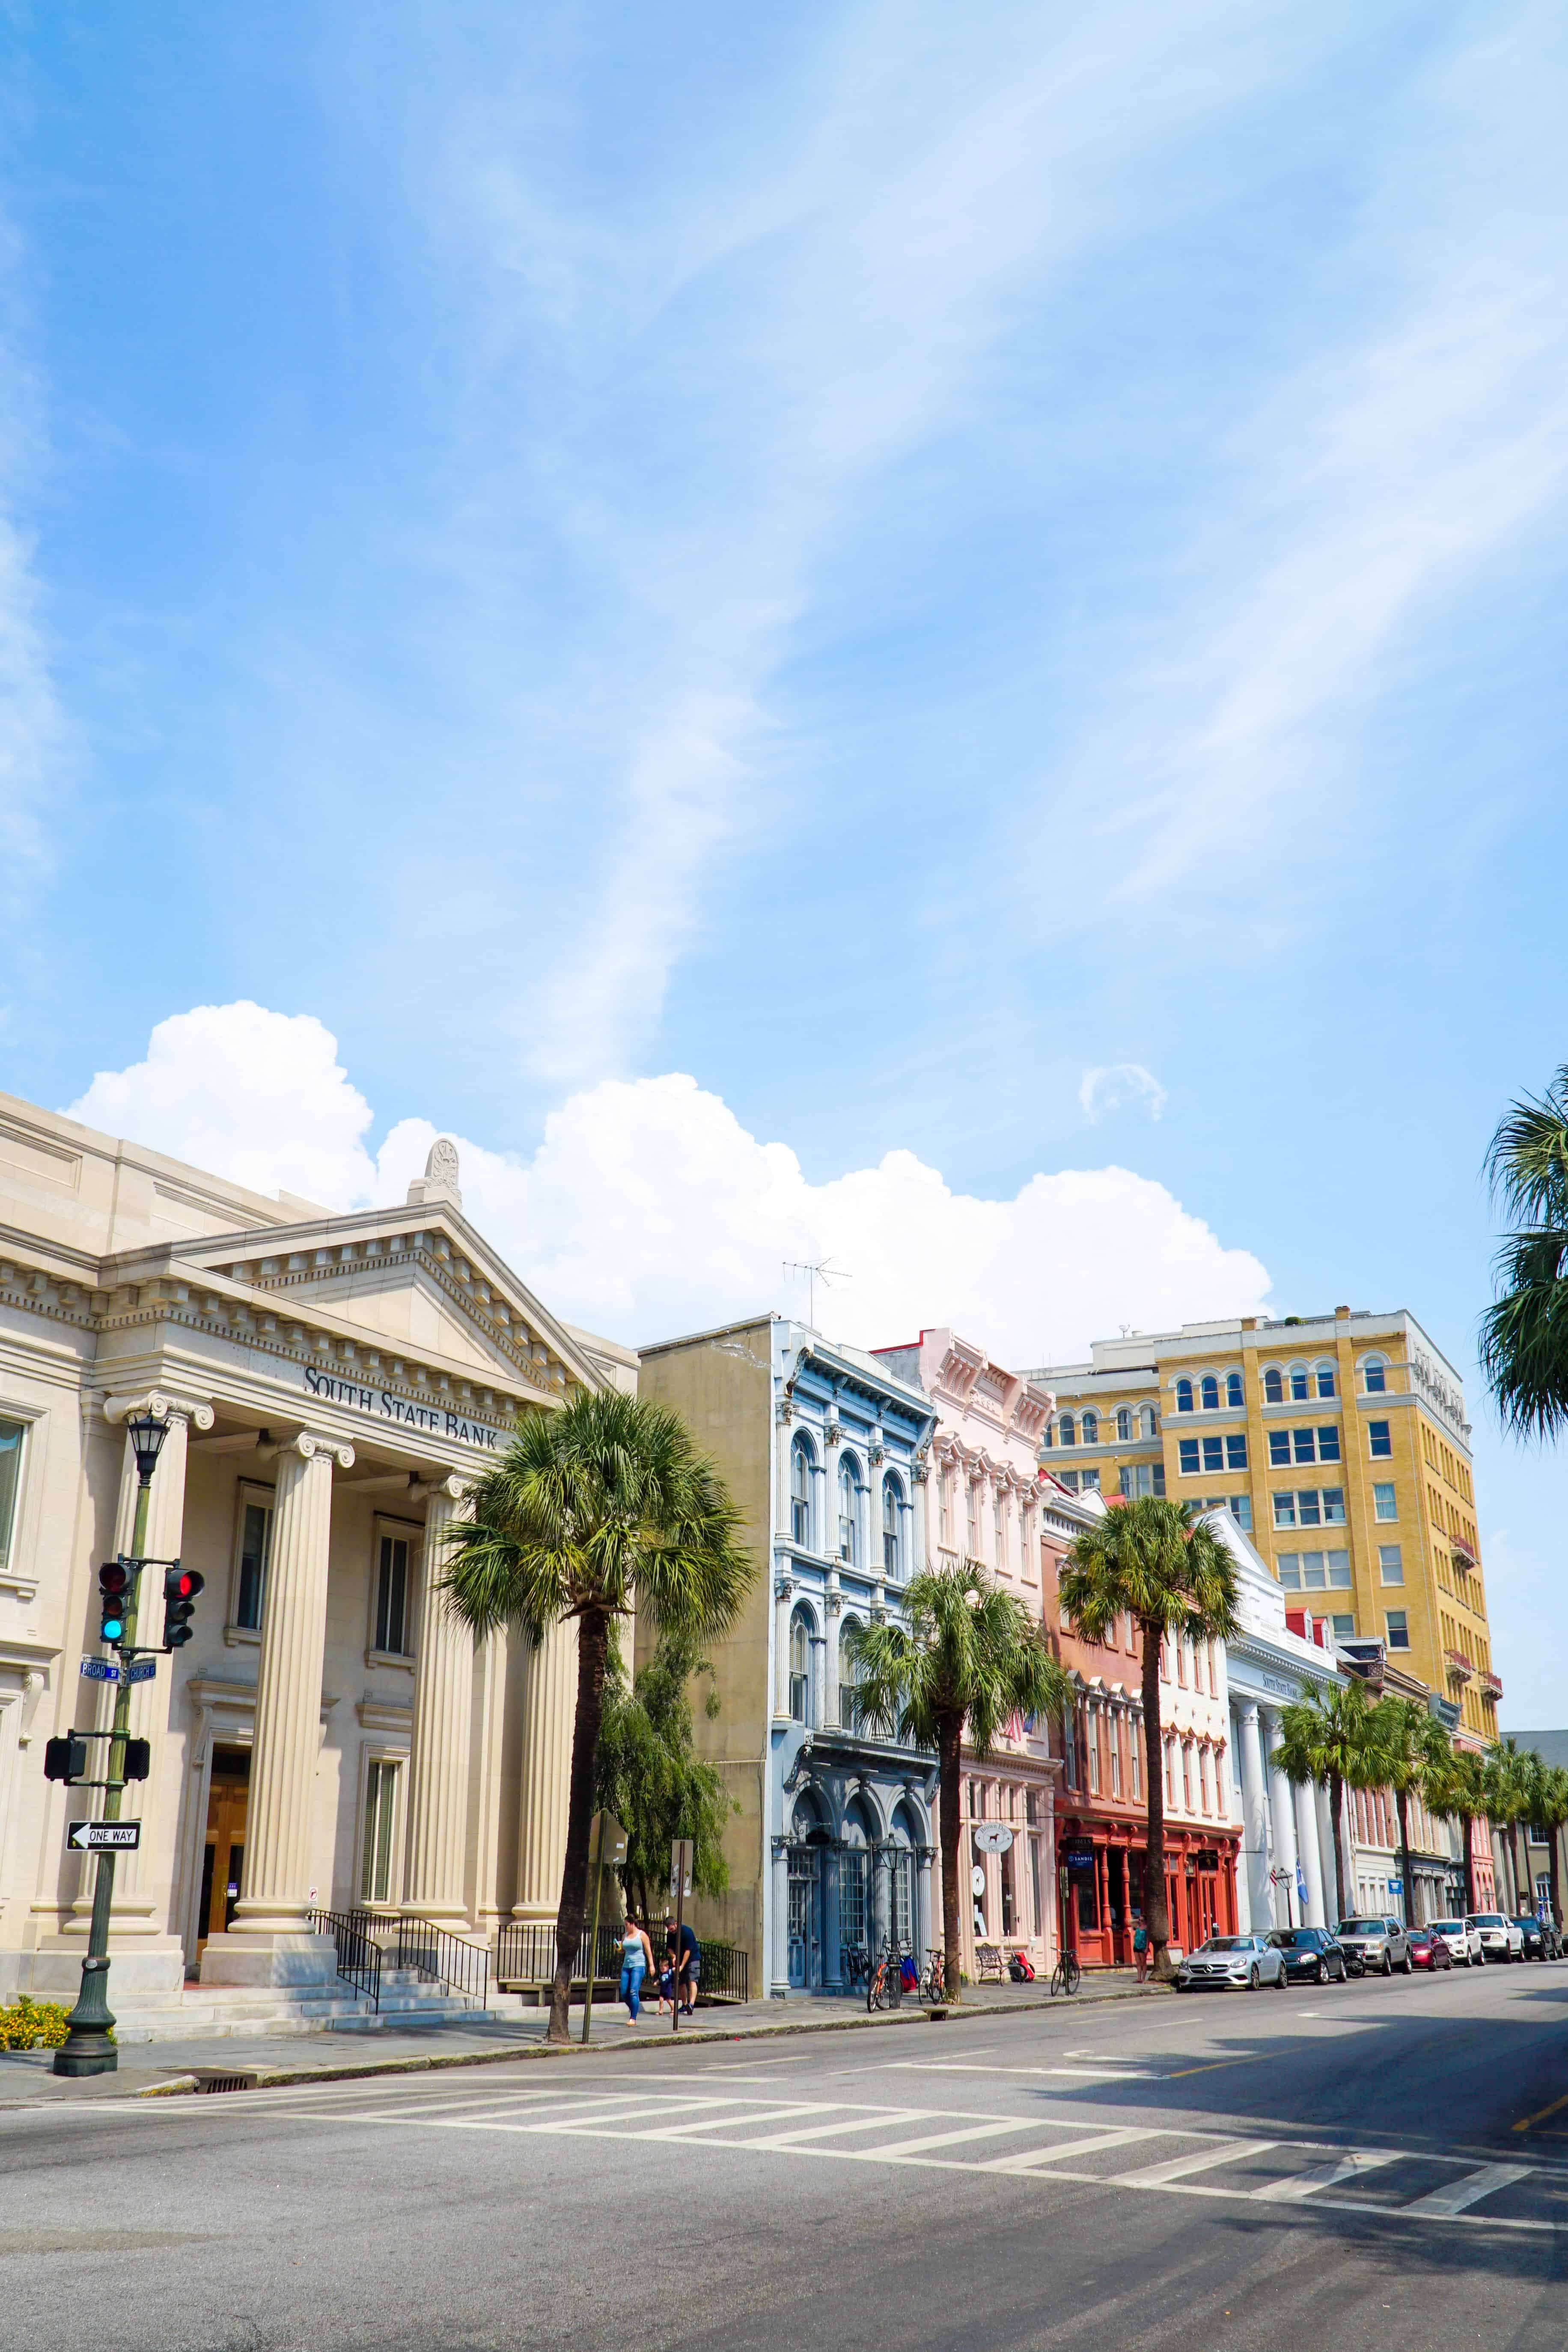 The Ultimate Guide to Charleston South Carolina | The Republic of Rose | #Charleston #SouthCarolina #Travel